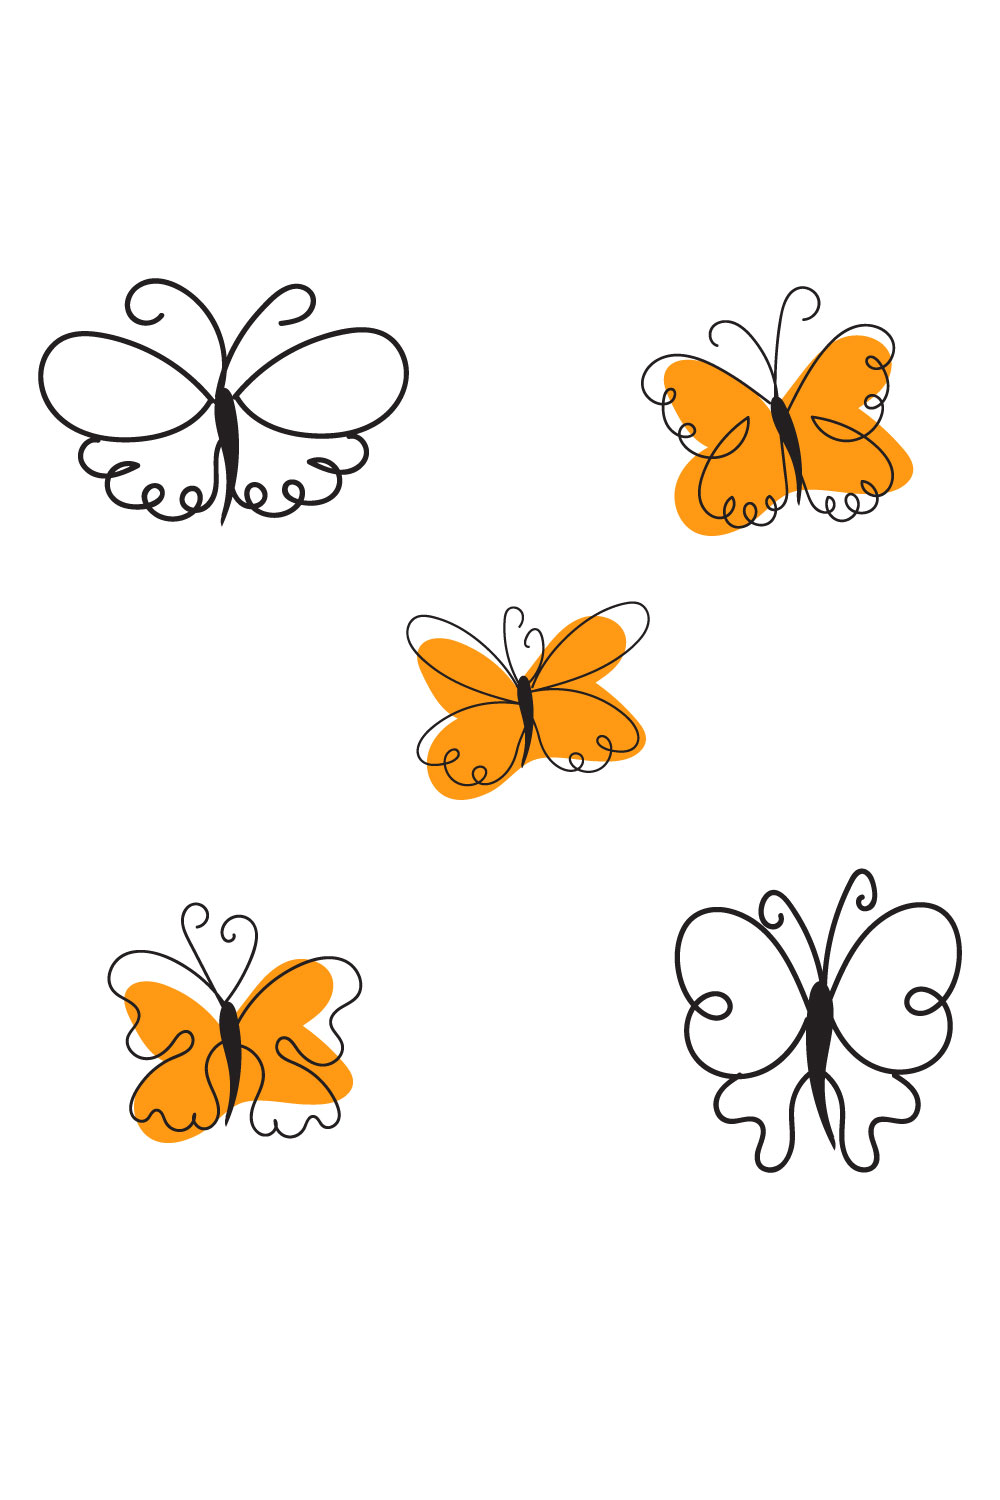 Group of four orange and black butterflies.